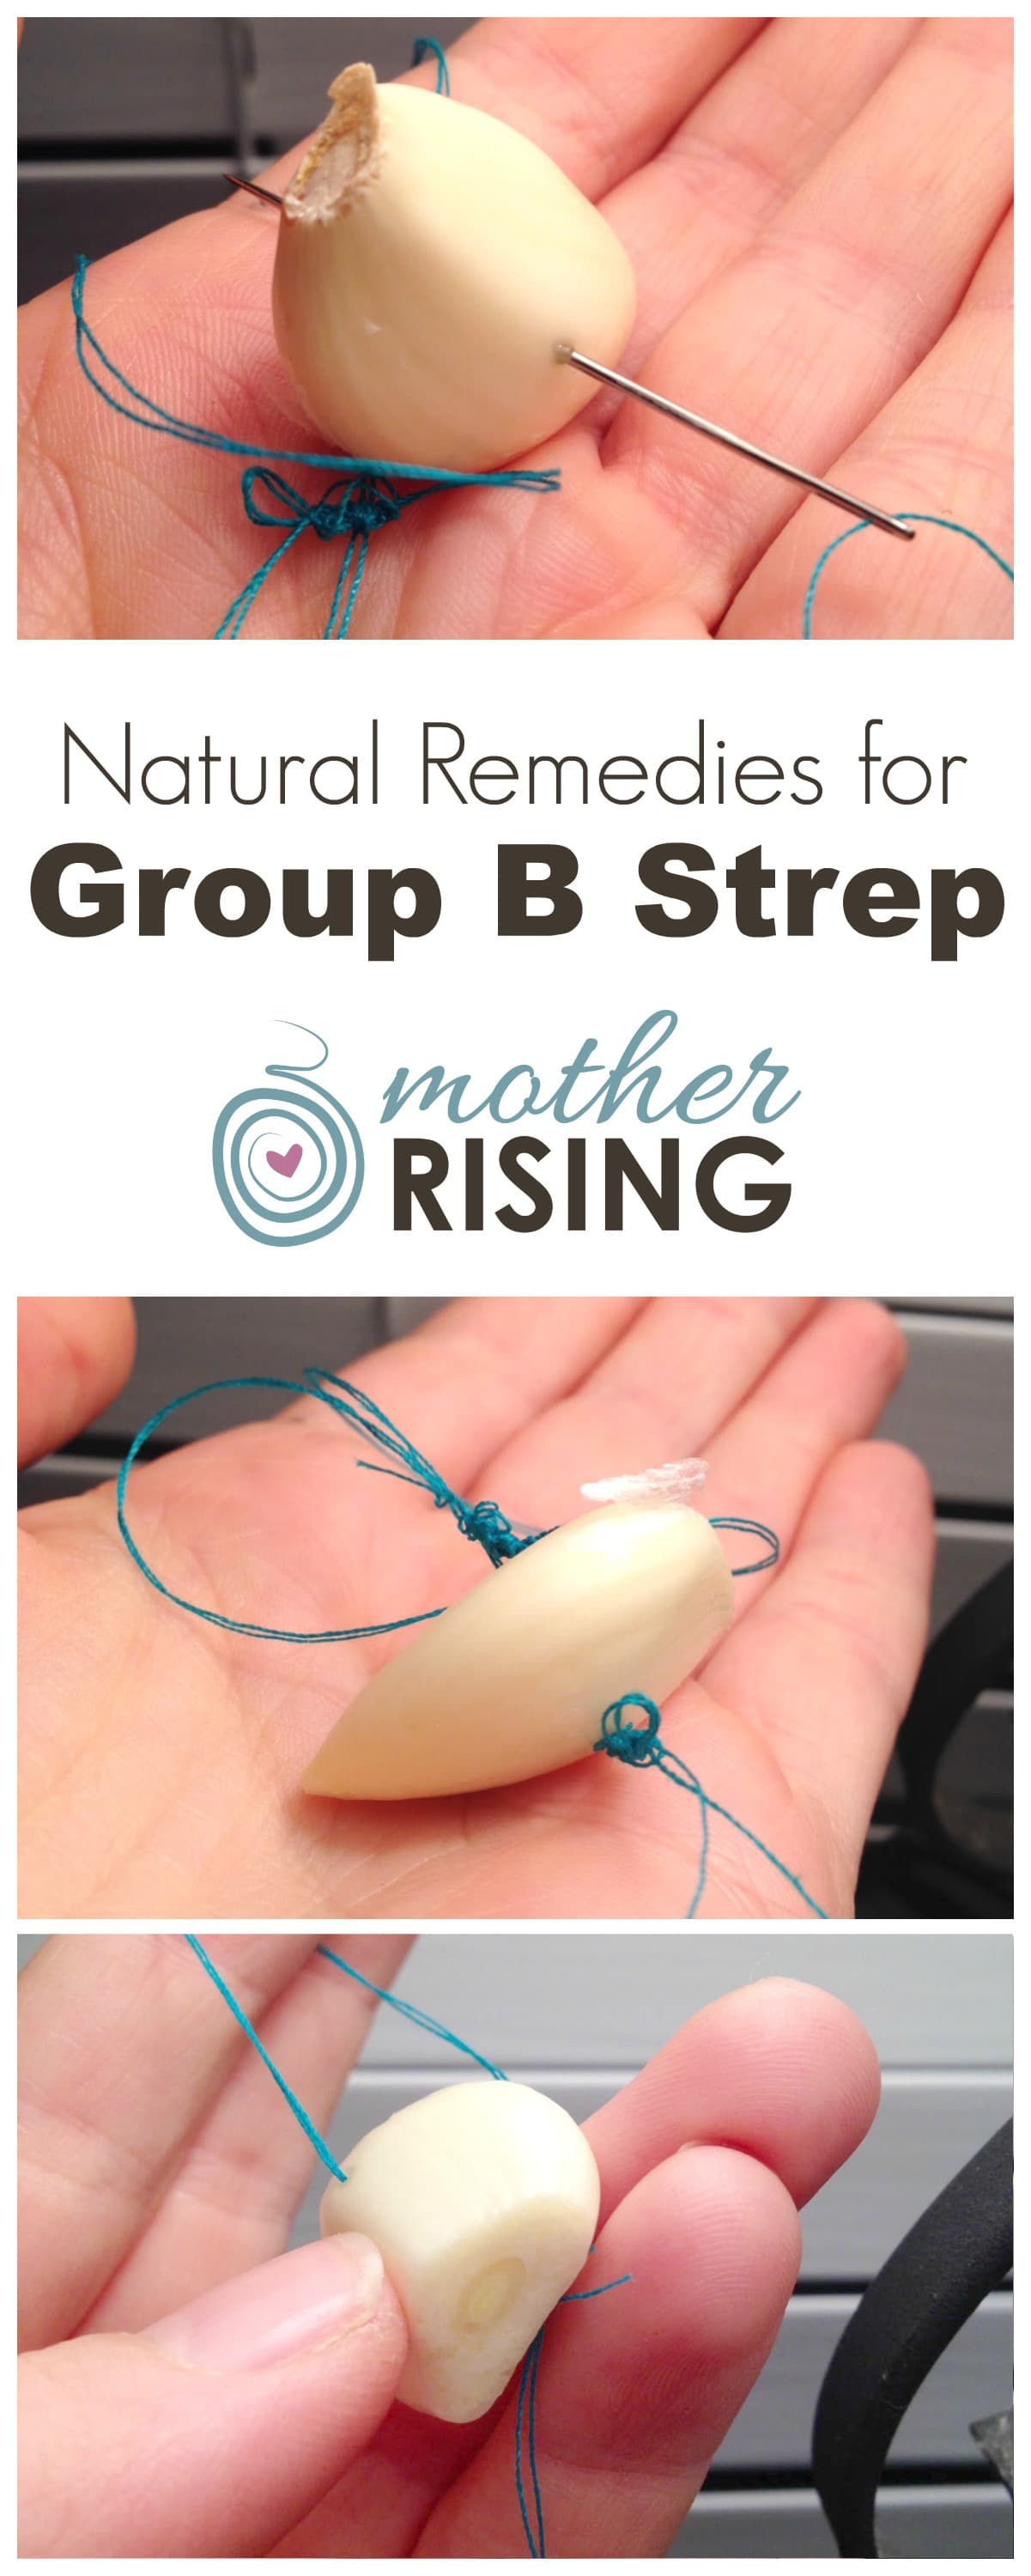 This is the ultimate guide to natural remedies for Group B Strep in pregnancy!!